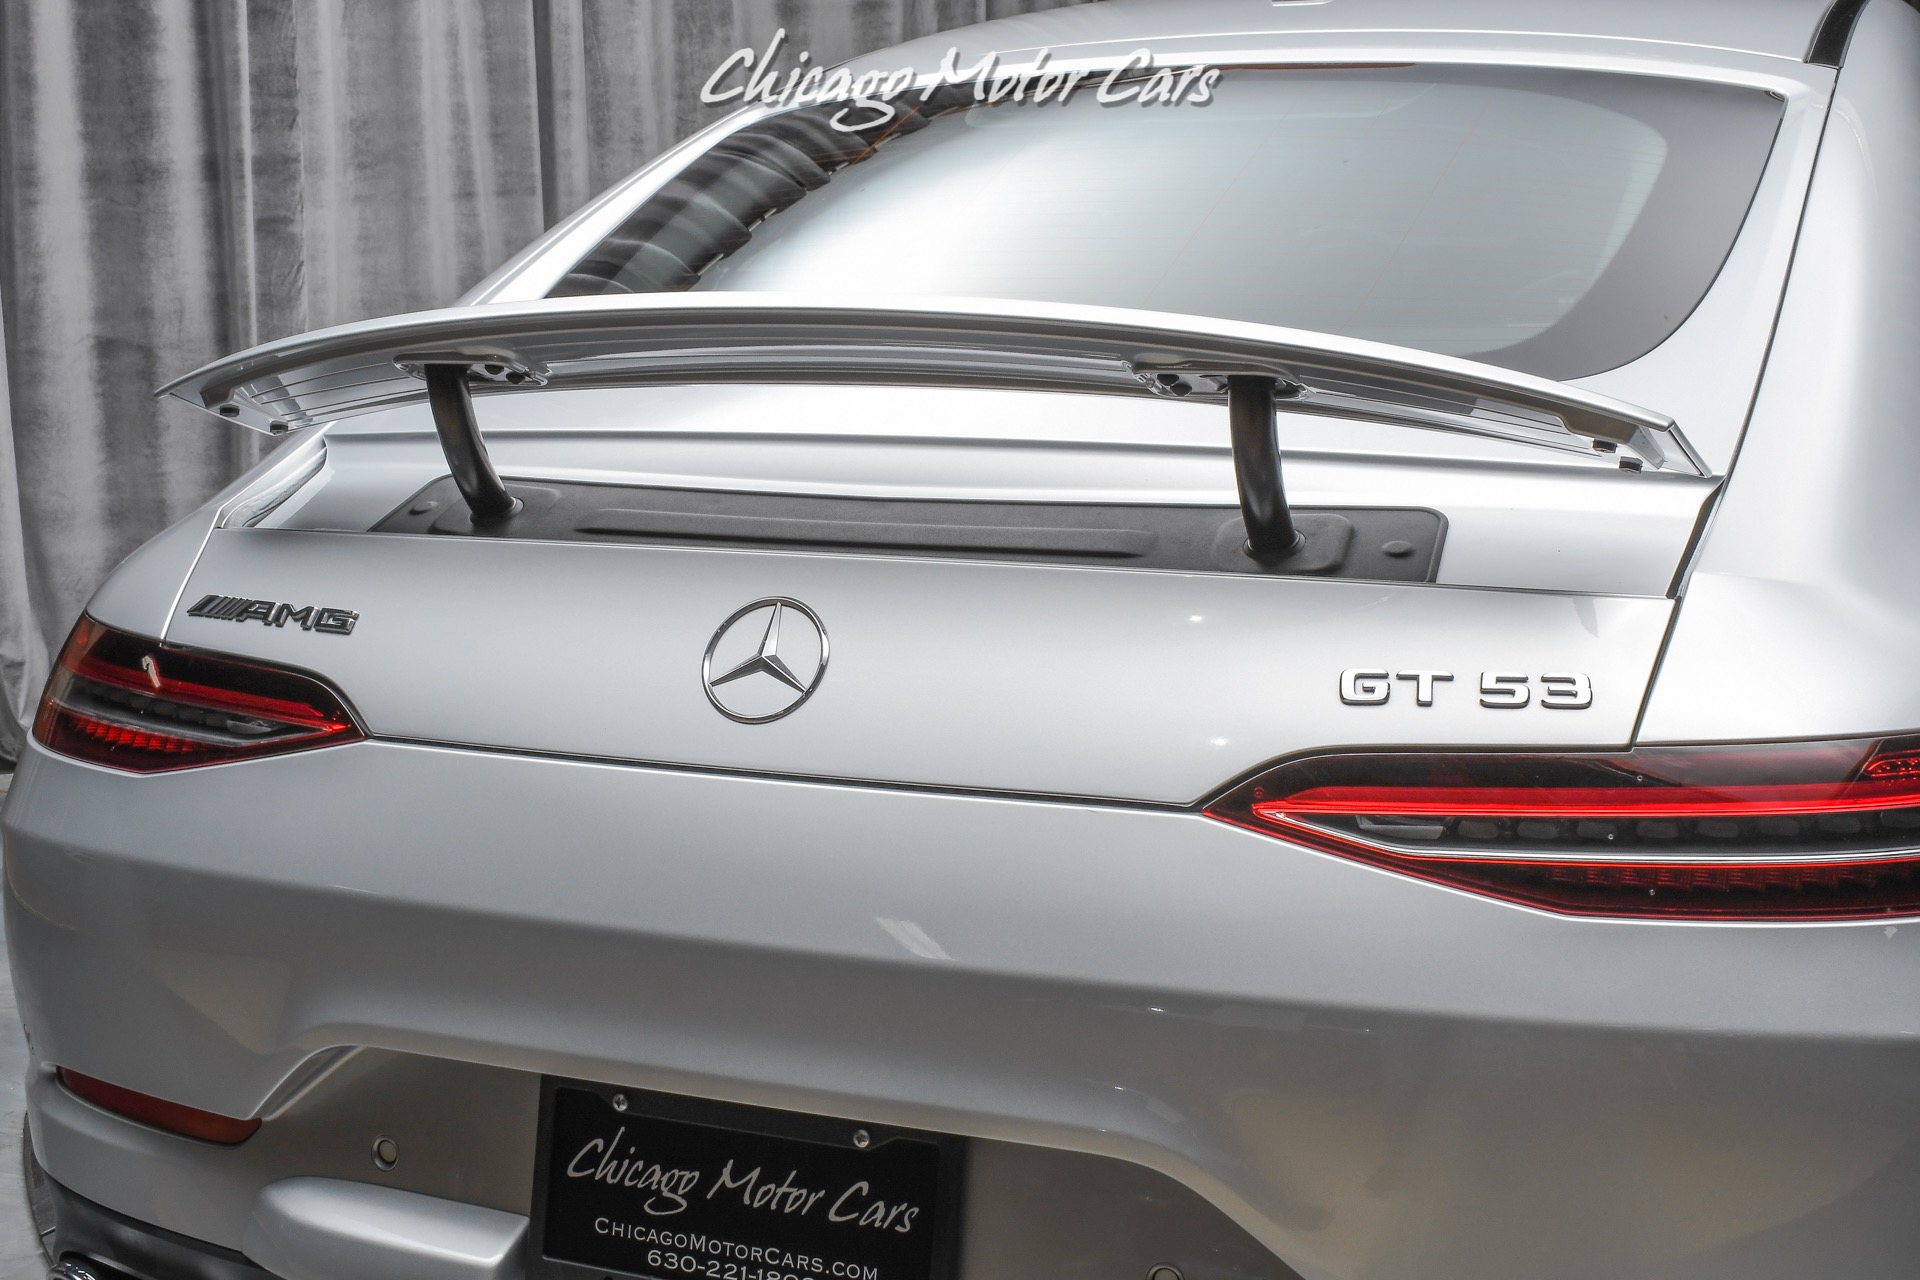 Used-2020-Mercedes-Benz-AMG-GT53-Sedan-Only-6k-Miles-LOADED-PERFORMANCE-EXHAUST-DRIVER-ASSISTANCE